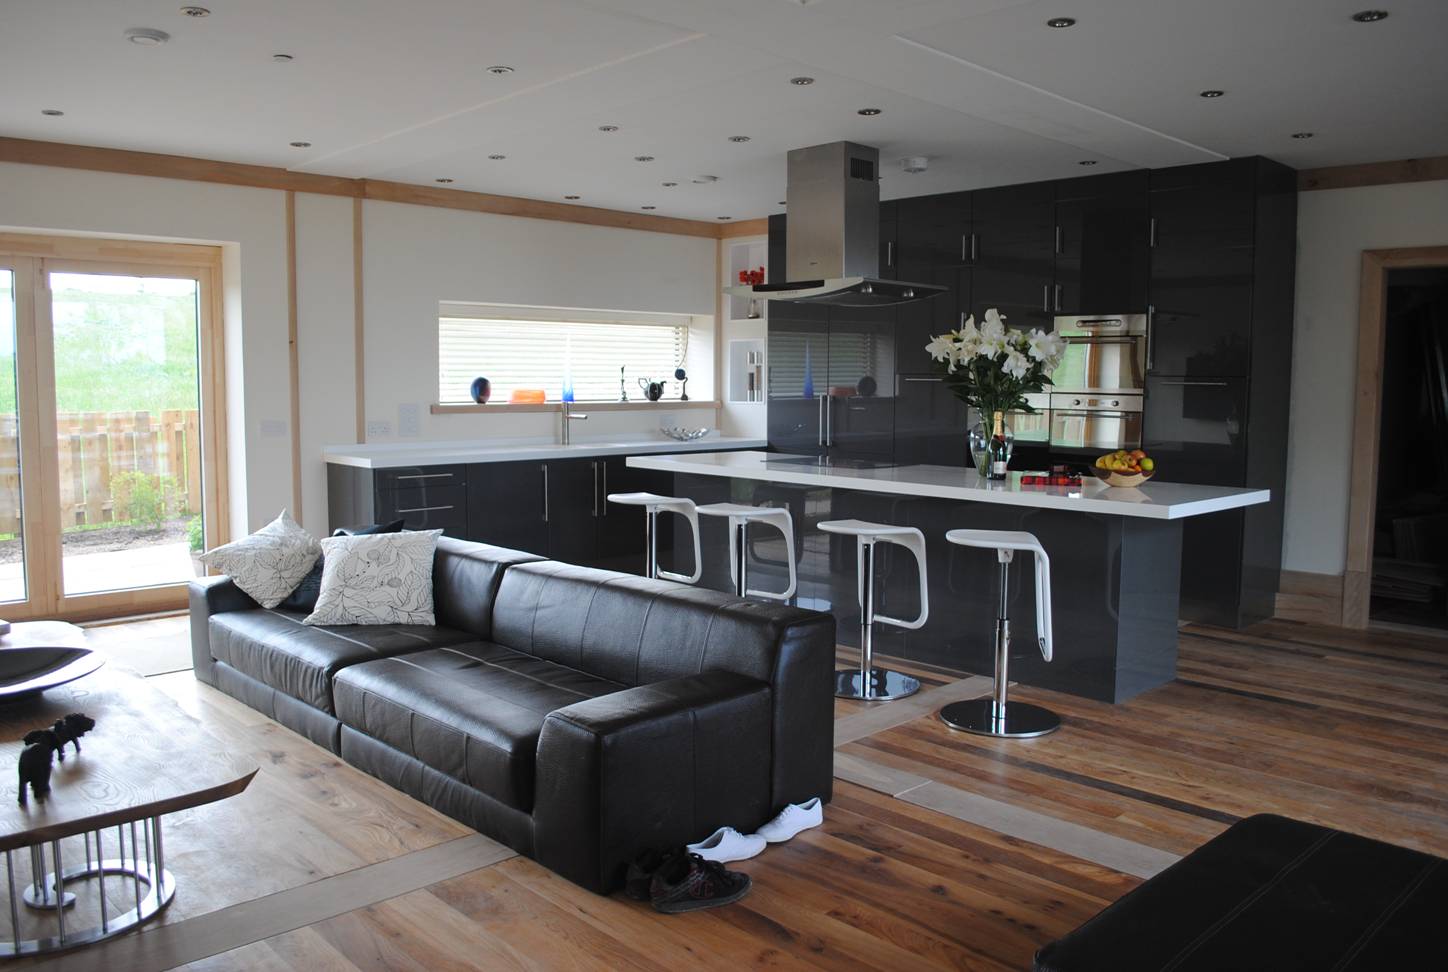  Workington property featured on Grand Designs